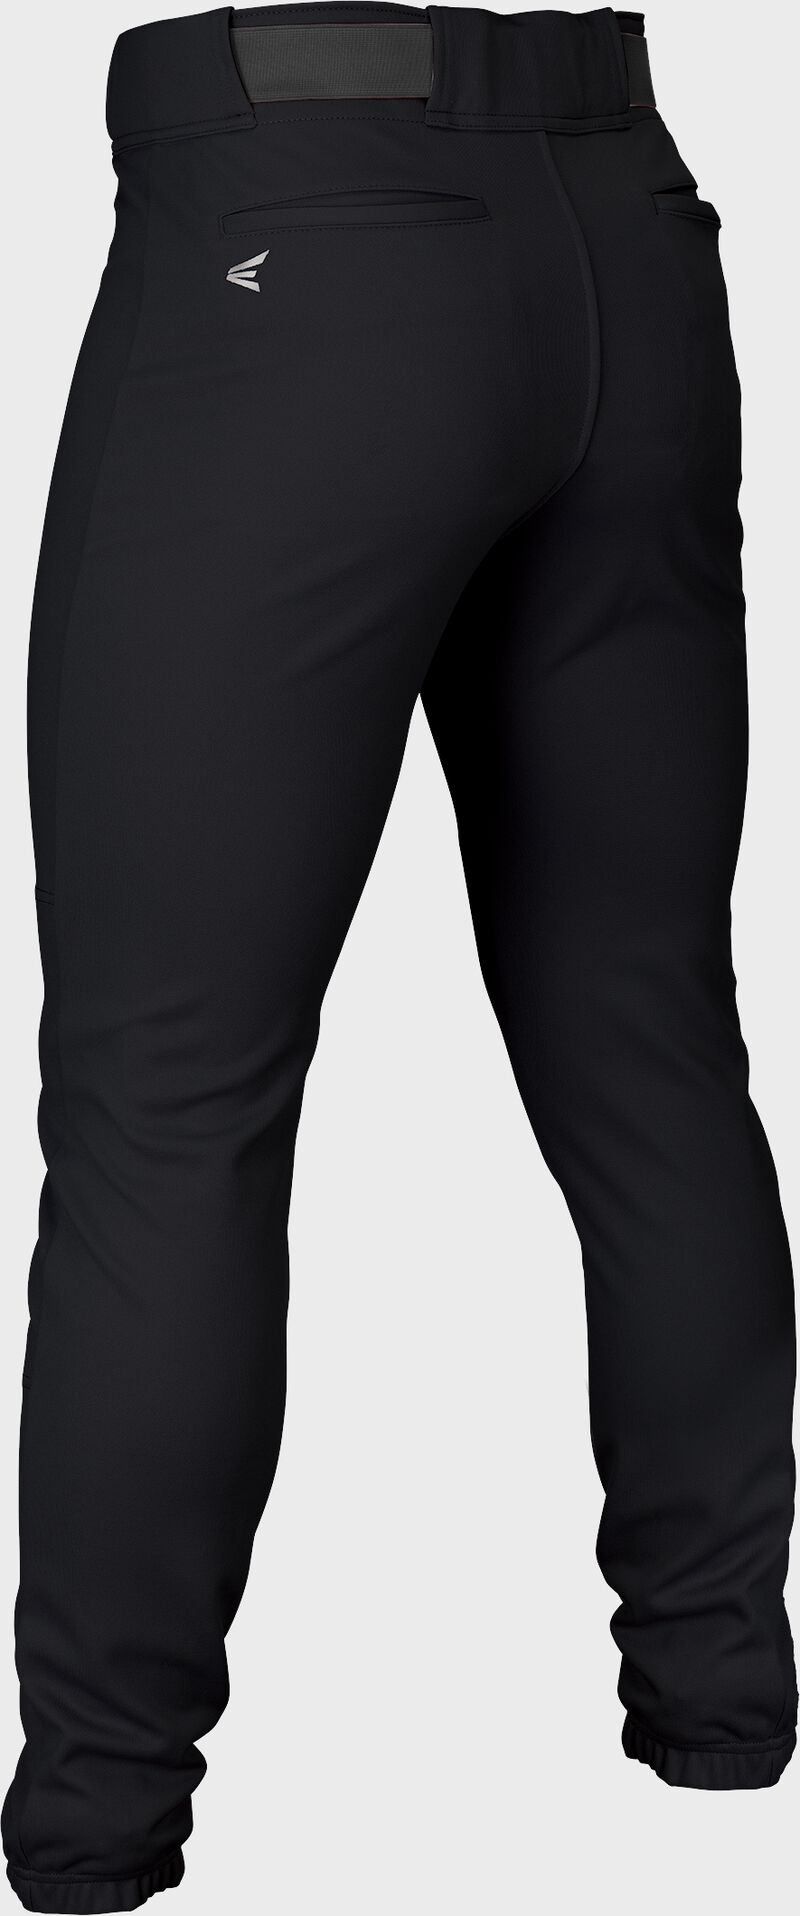 Rival+ Pro Taper Pant Youth BLACK S image number null